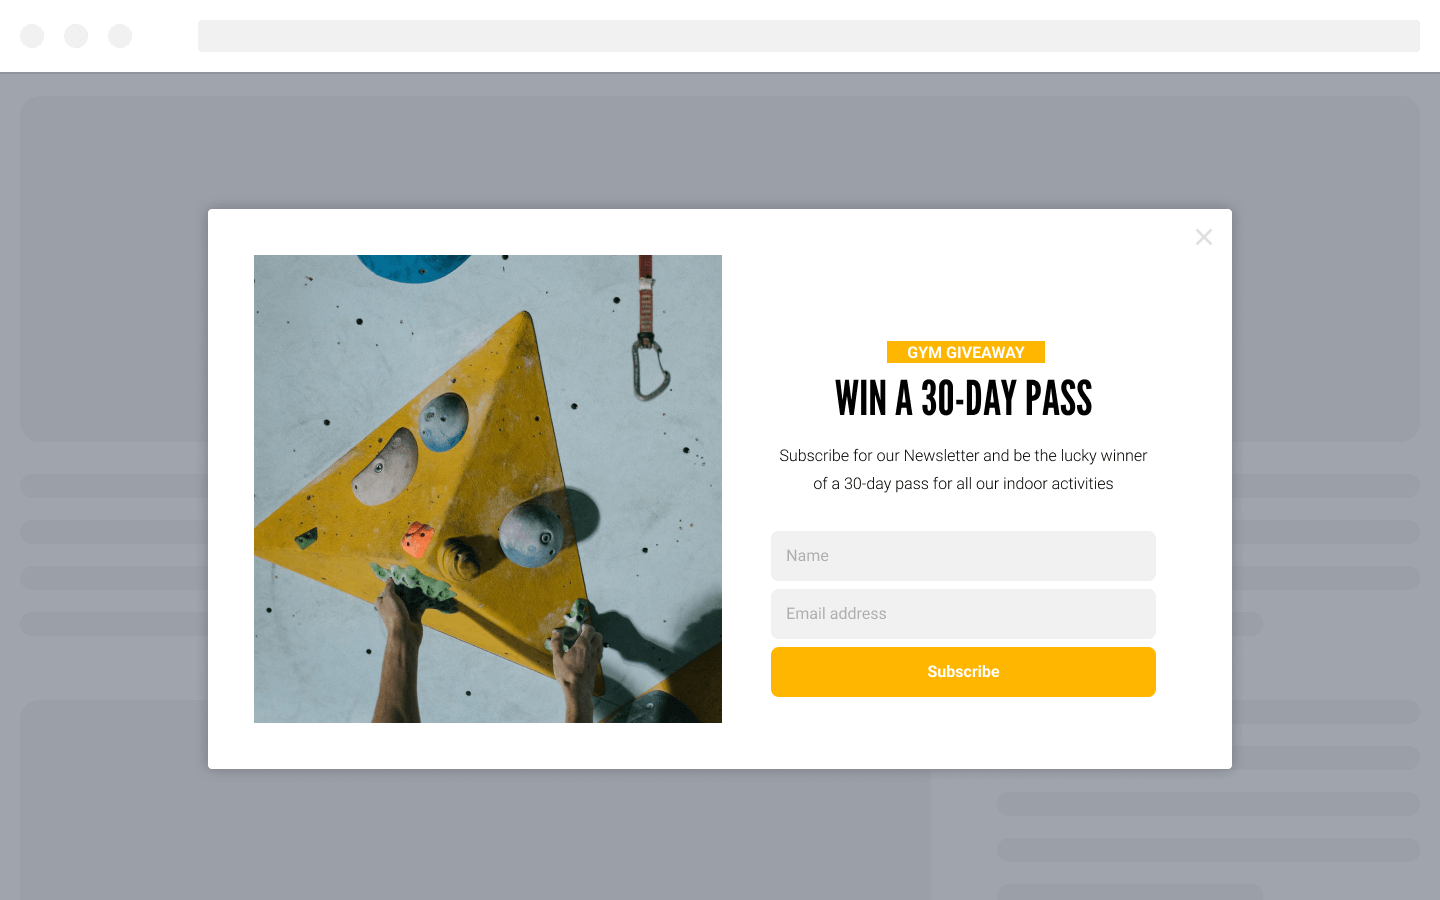 Gym Pass Giveaway Newsletter Popup Form